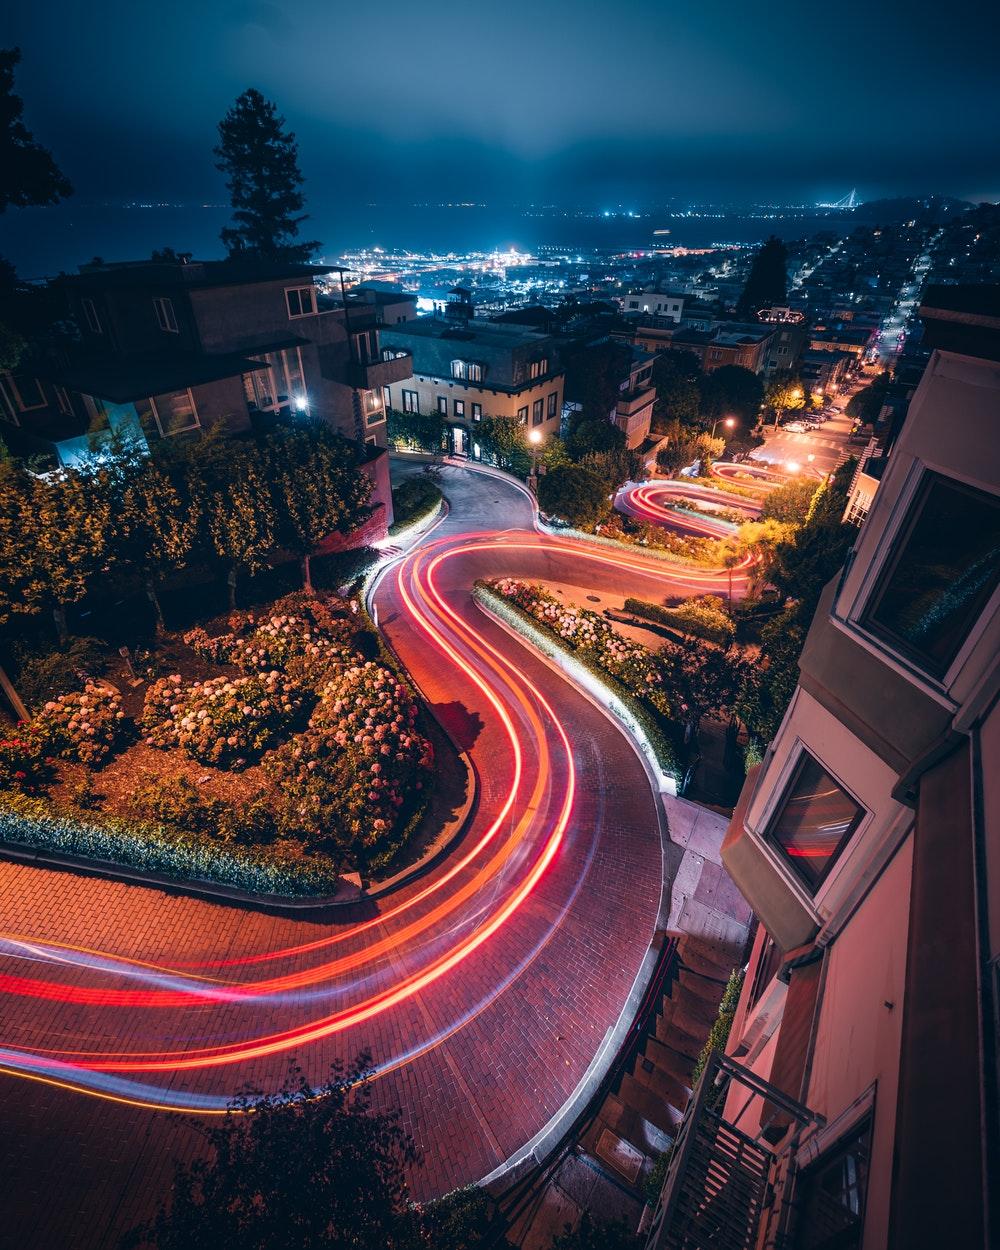 Lombard Street Picture. Download Free Image